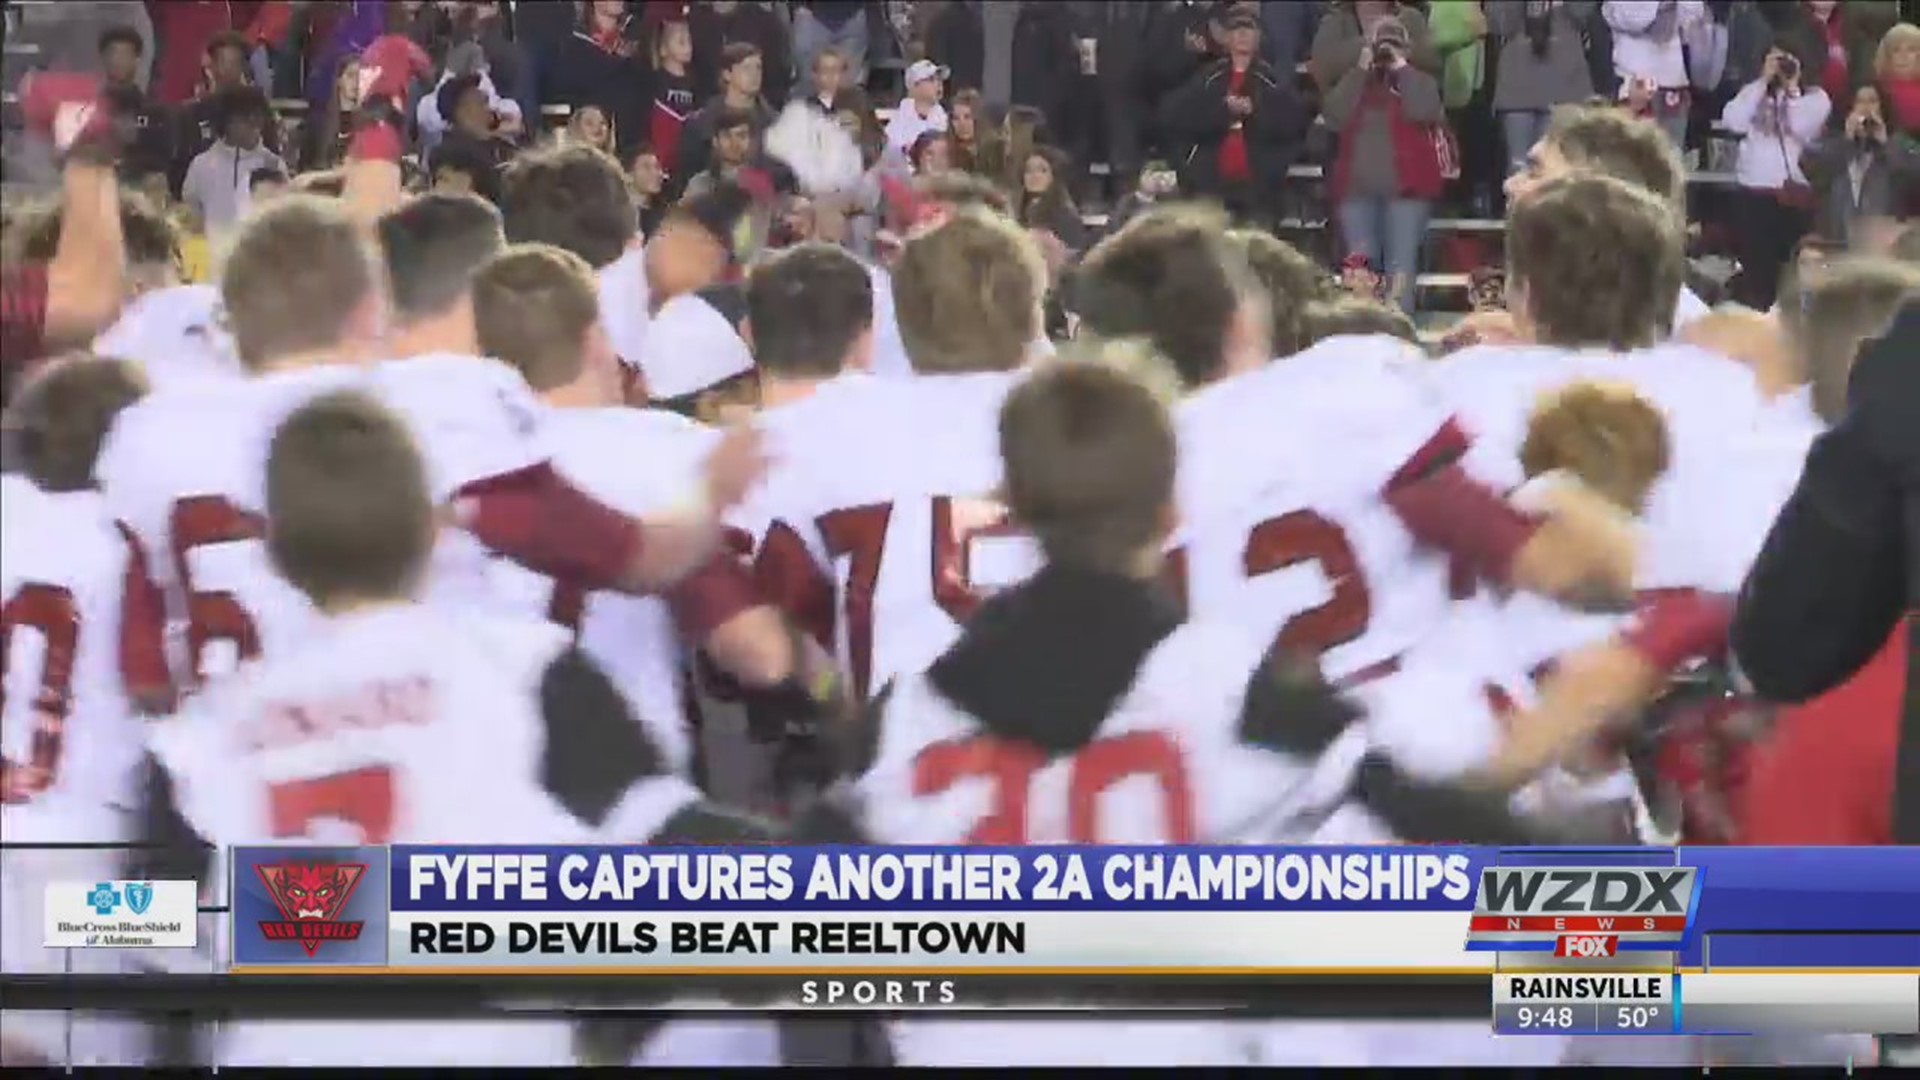 The Fyffe Red Devils rolled to an insurmountable 42-point lead in the opening half and cruised to a 56-7 victory over Reeltown to claim their second straight Class 2A state championship.